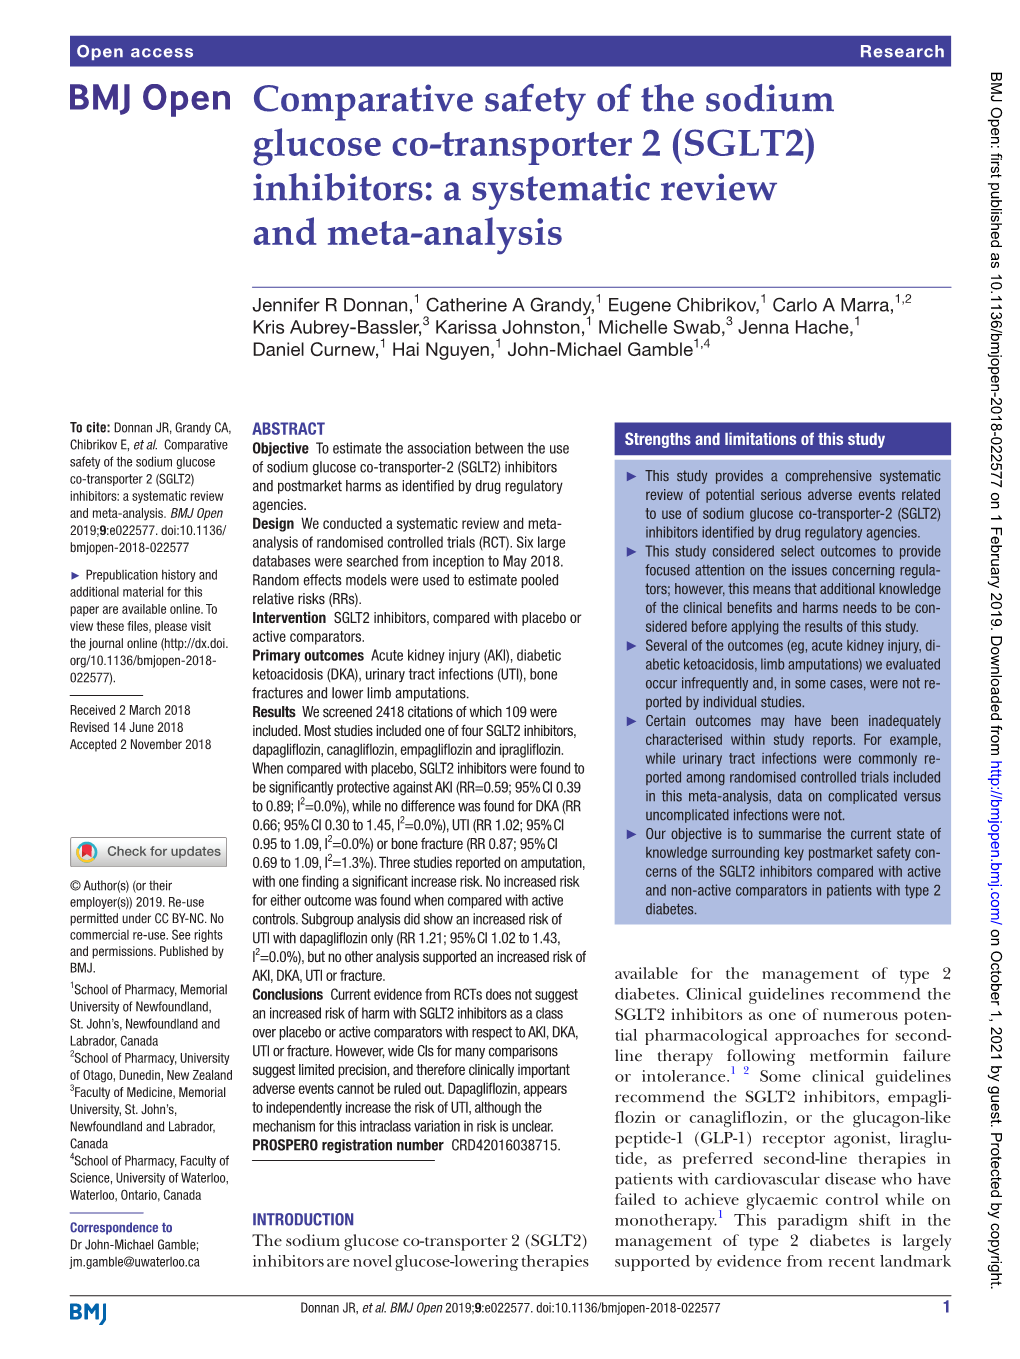 (SGLT2) Inhibitors: a Systematic Review and Meta-Analysis